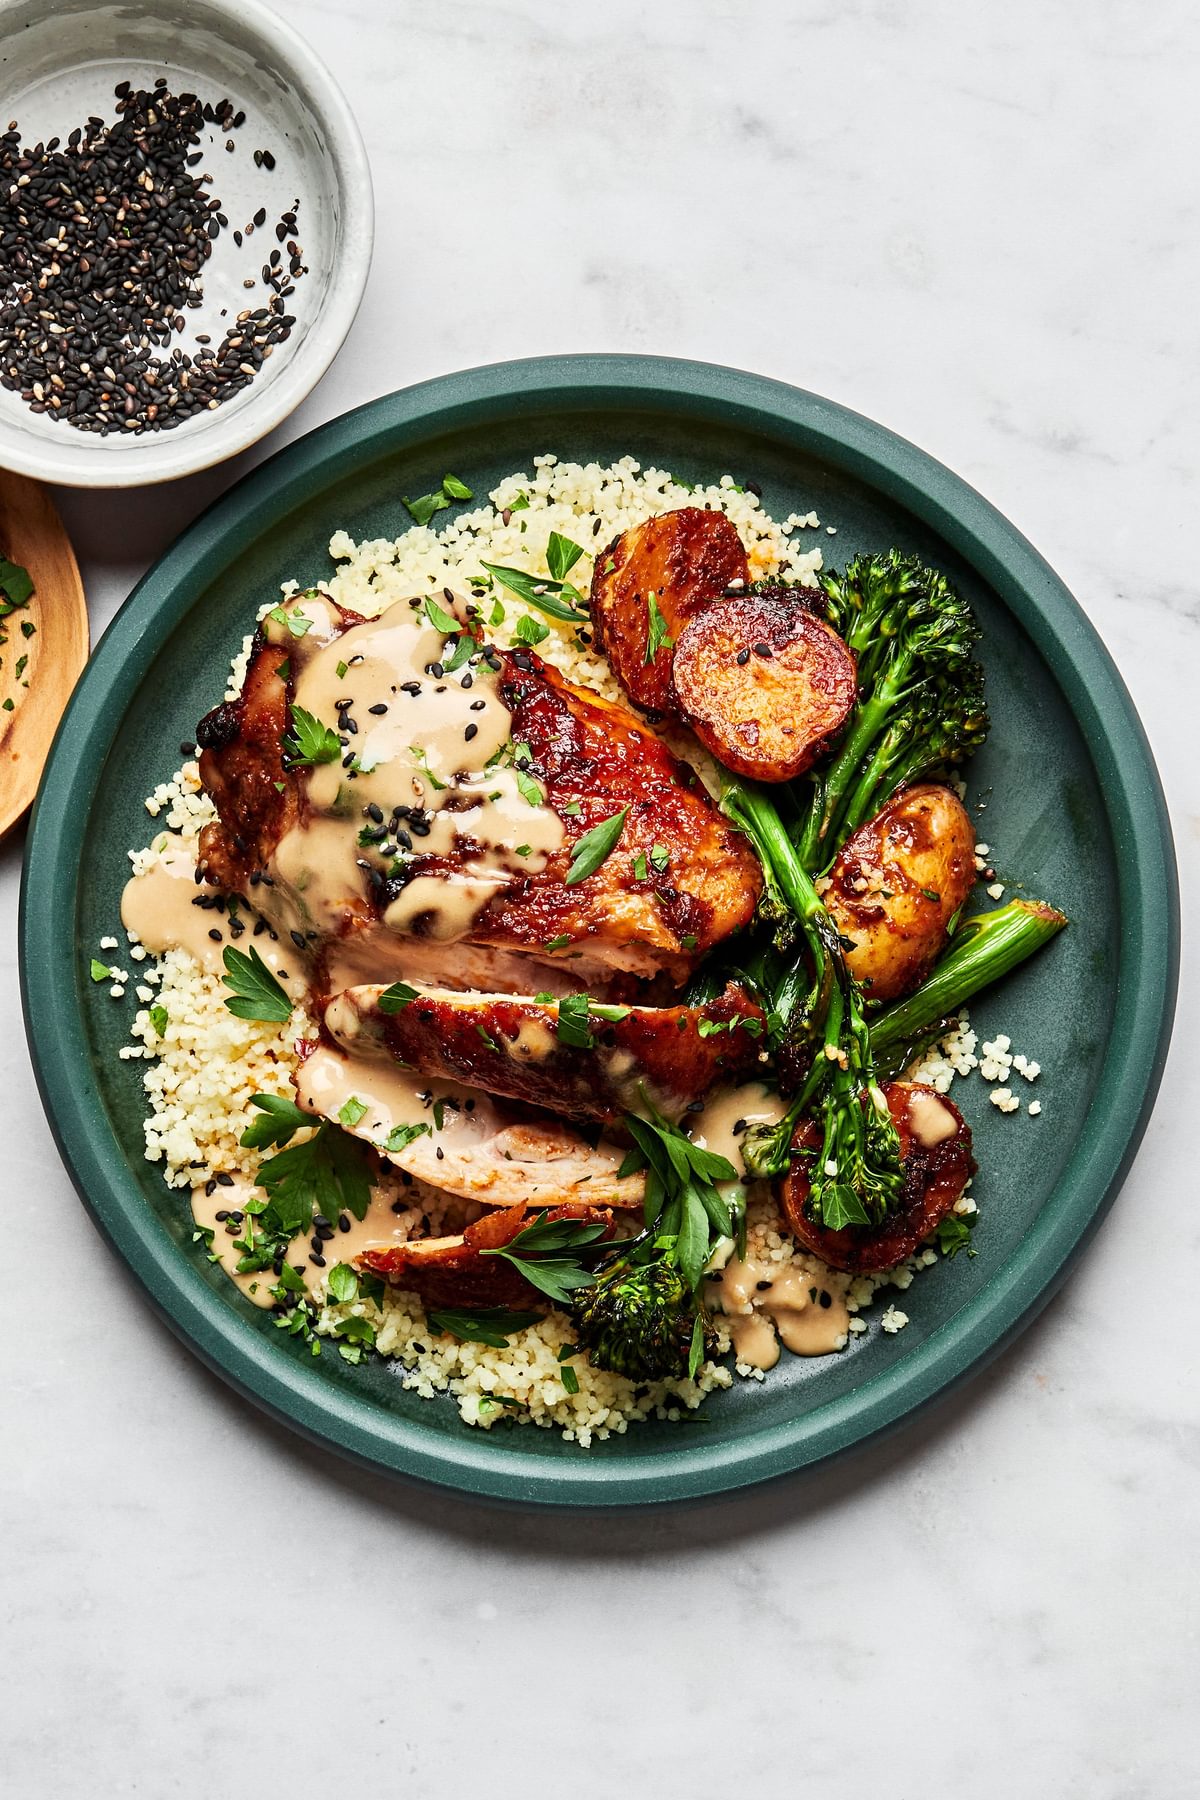 Honey harissa chicken, potatoes and broccoli served over couscous and drizzled with tahini sauce